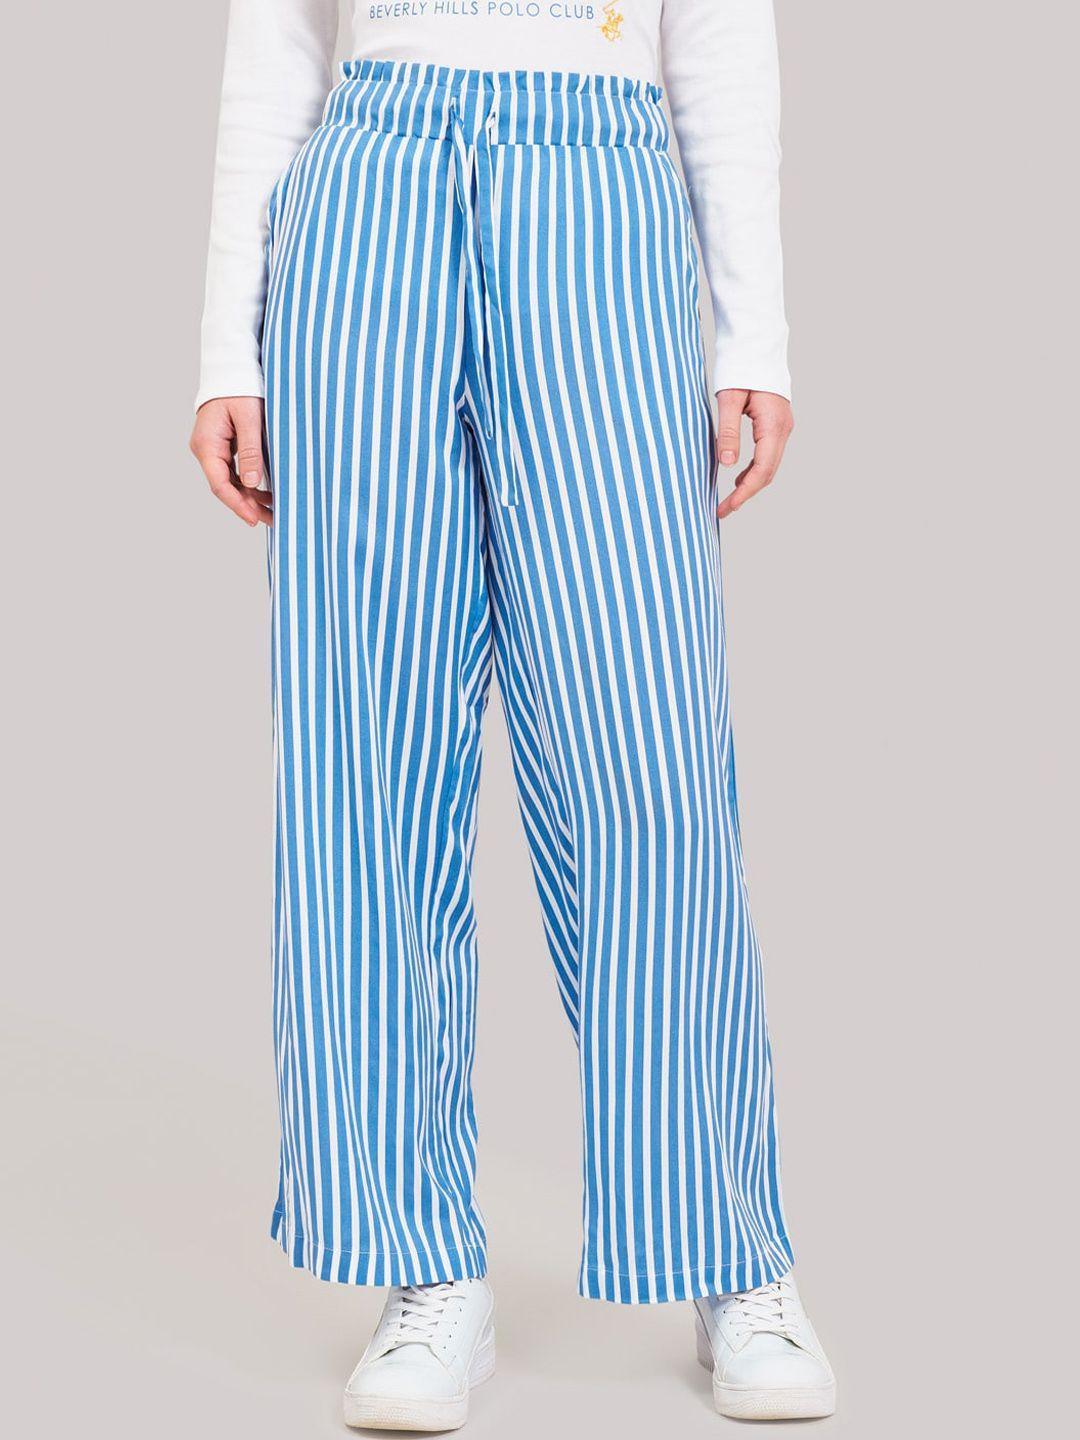 beverly hills polo club women blue & white regular fit striped parallel trousers